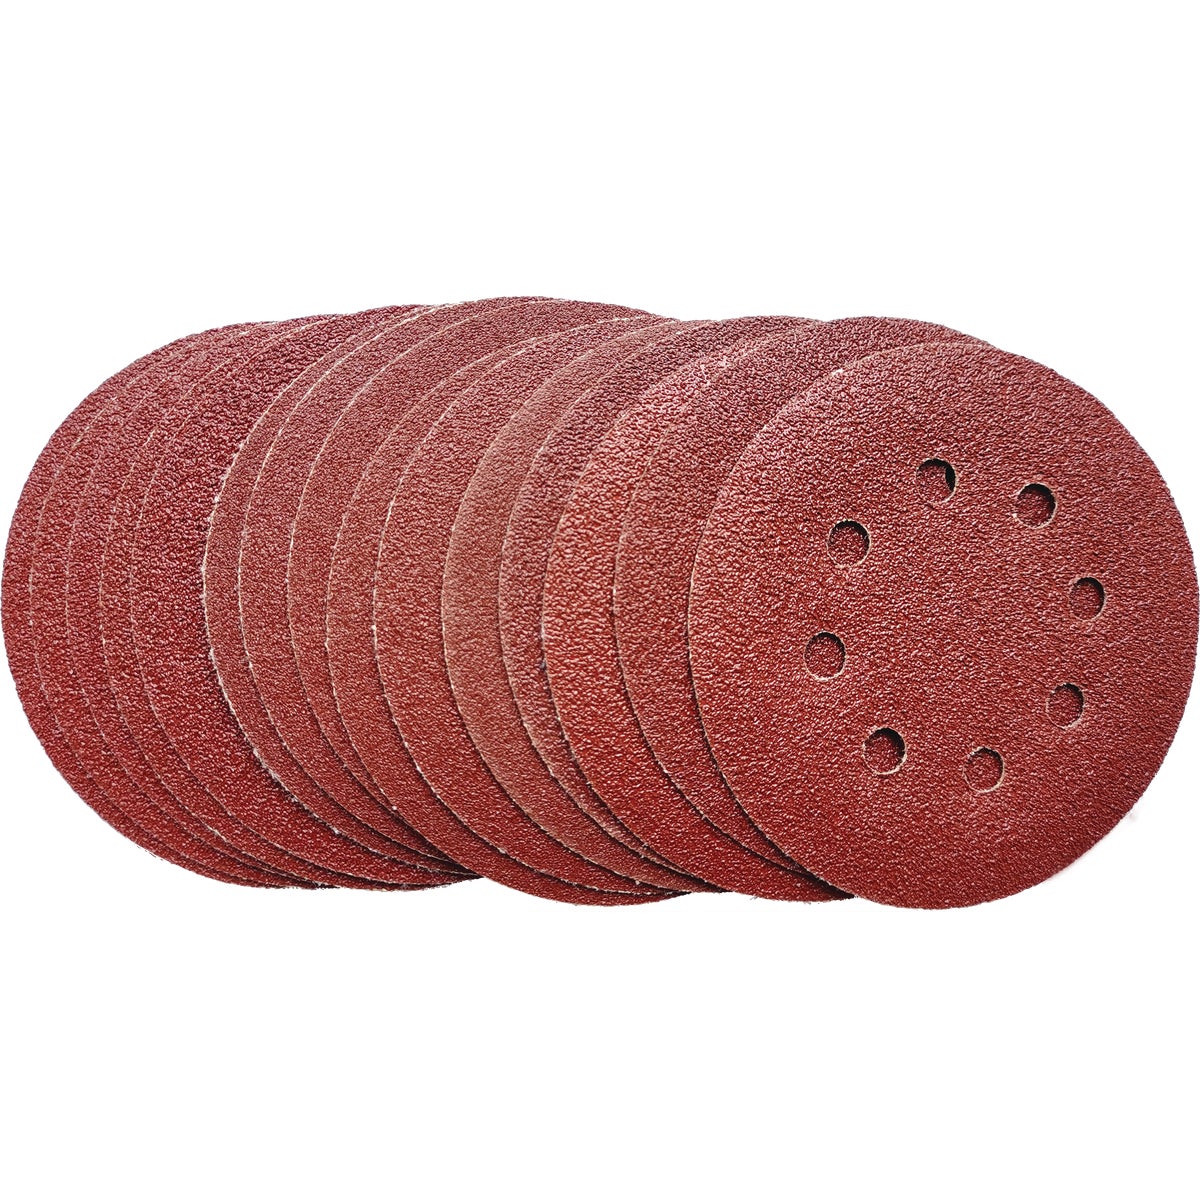 5 In. 60-Grit 8-Hole Pattern Vented Sanding Disc with Hook & Loop Backing (15-Pack)